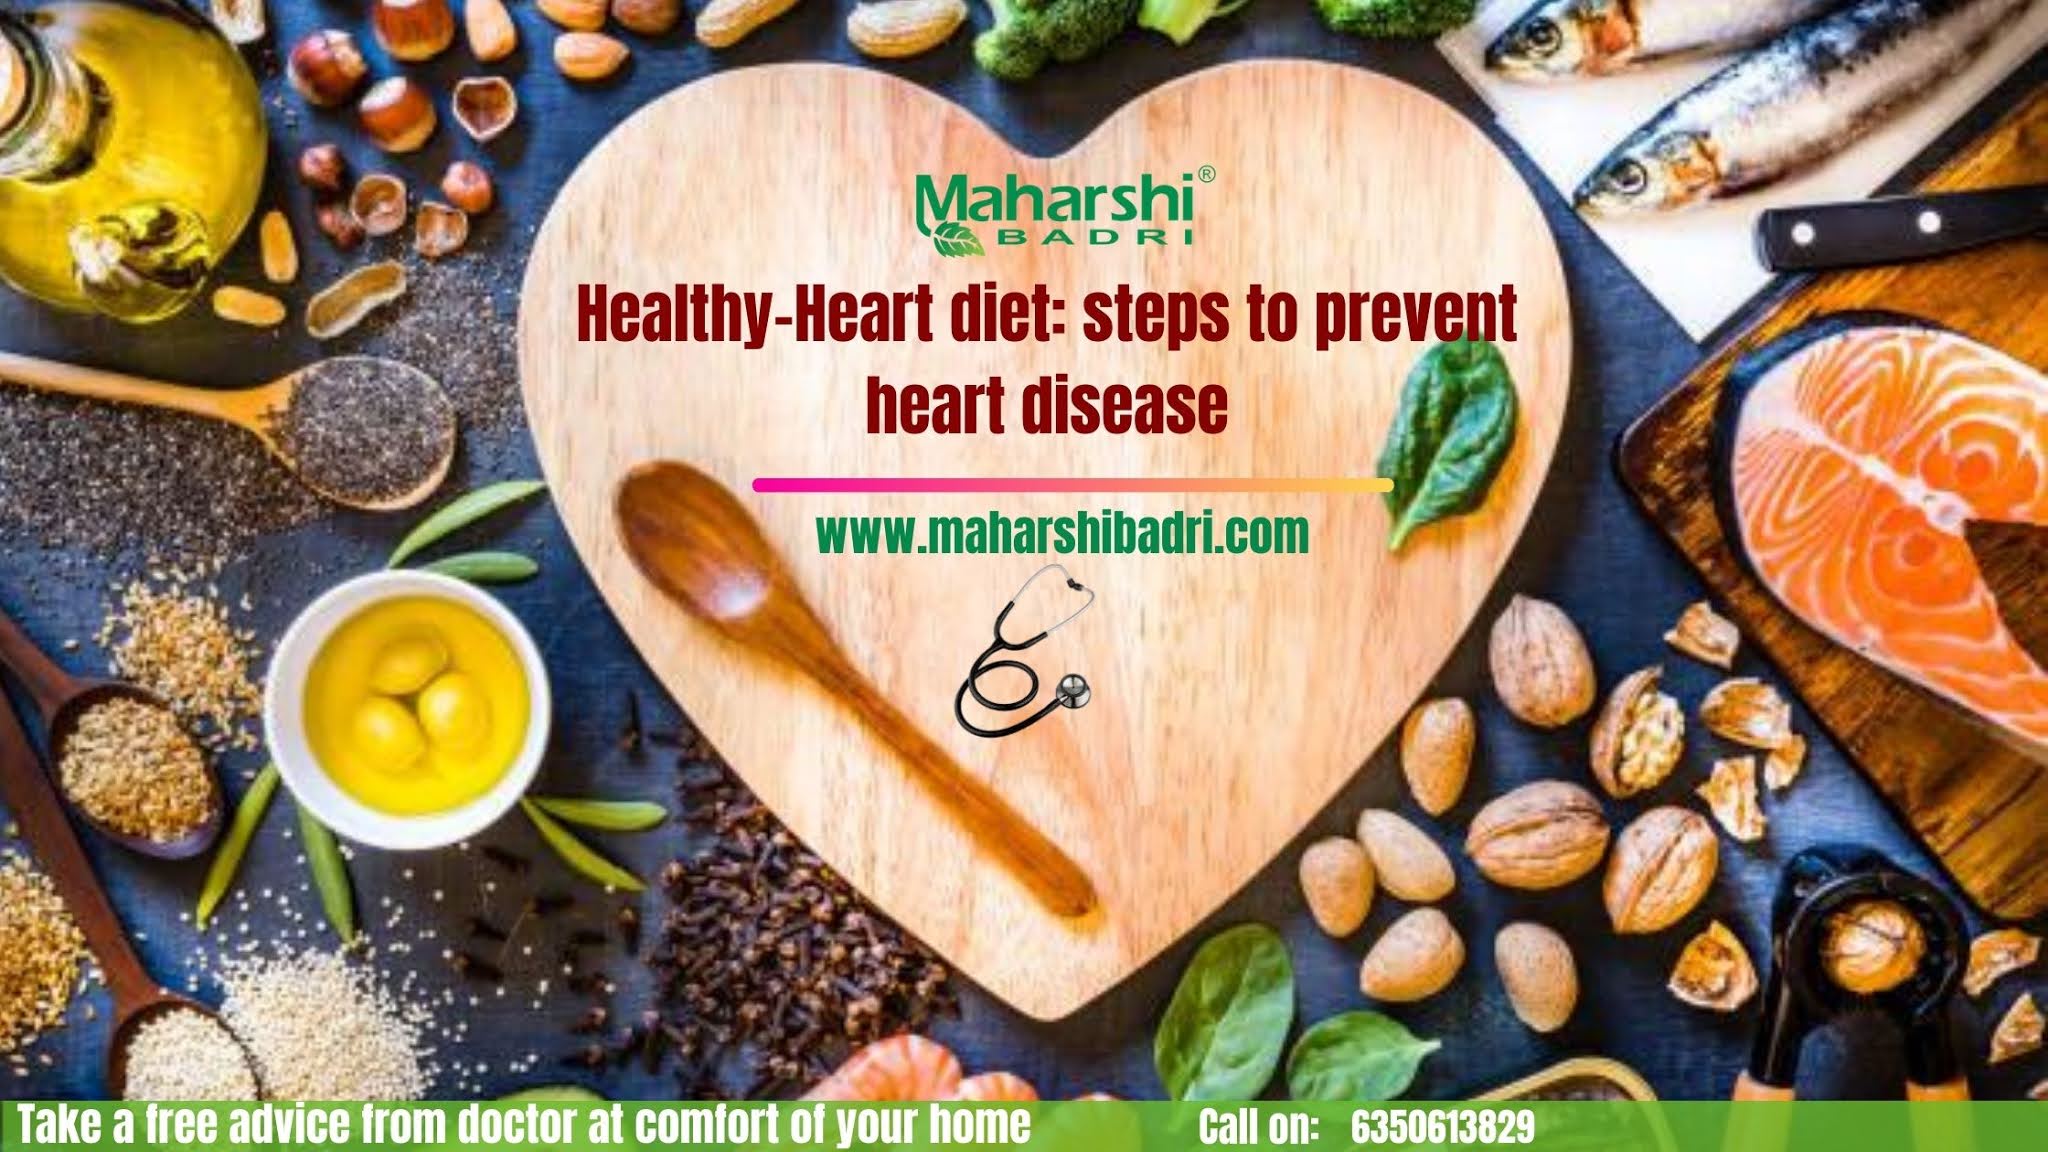 Healthy-Heart diet: steps to prevent heart disease